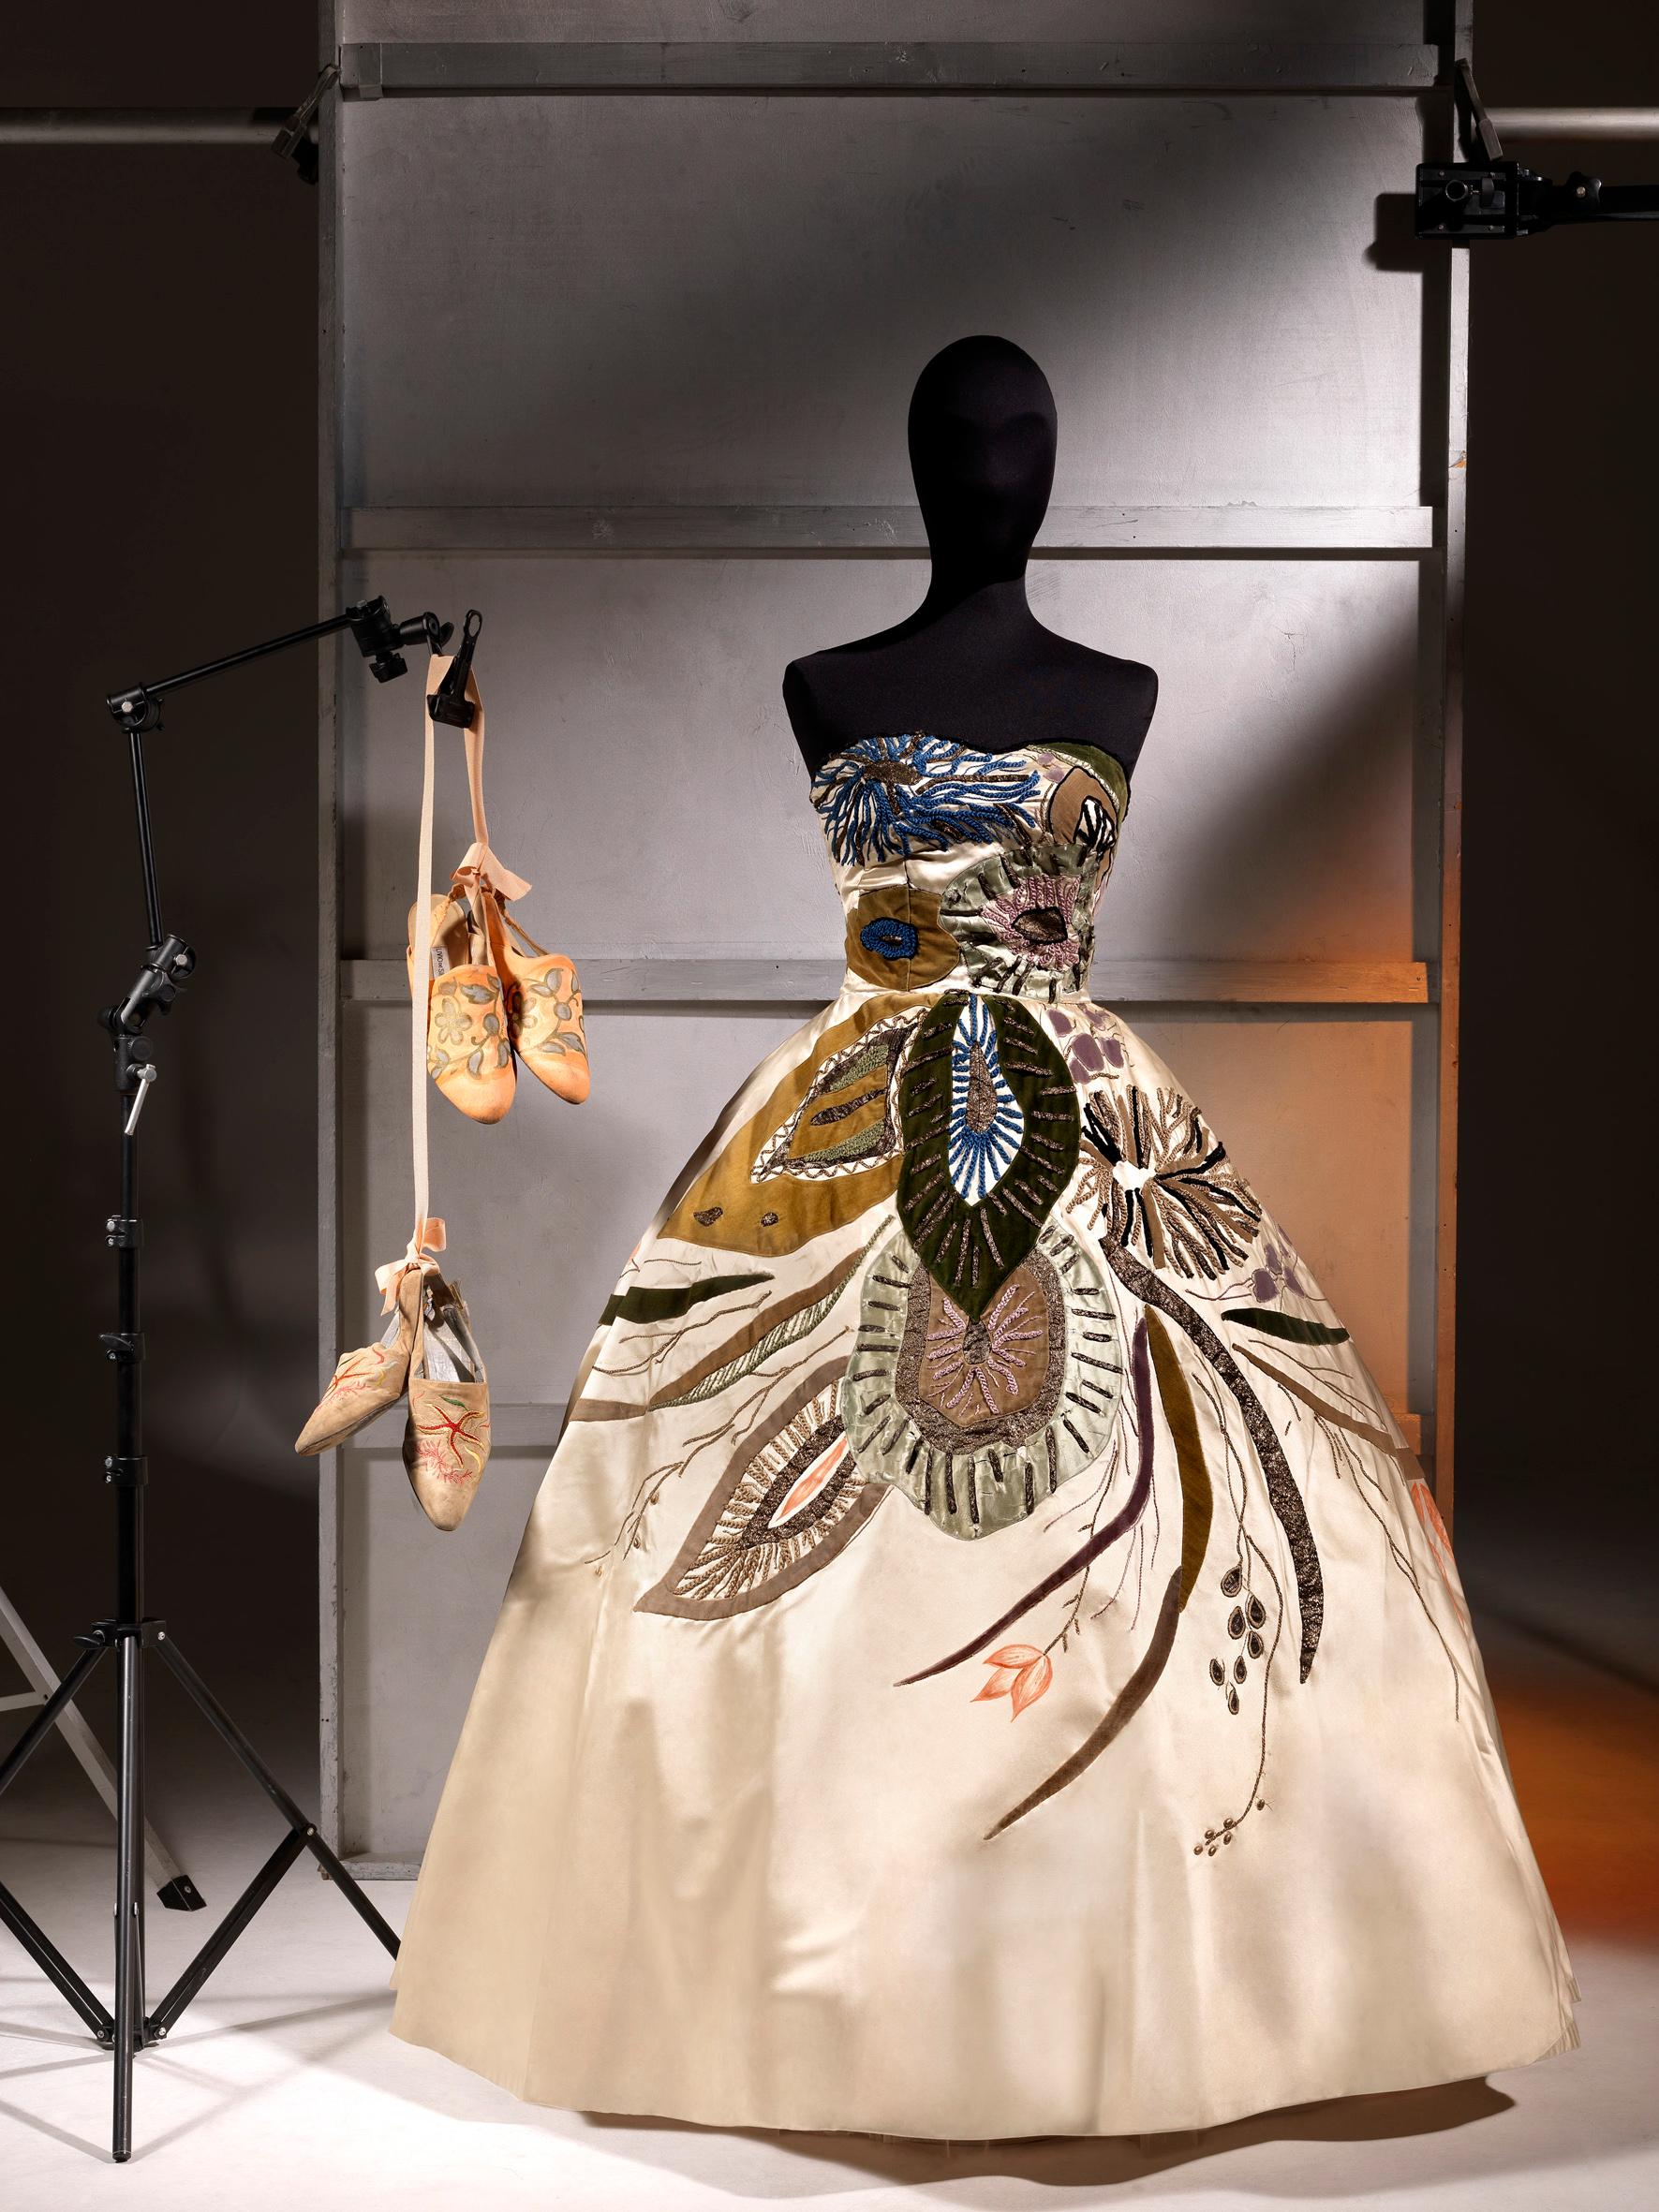 An important and absolutely magnificent Emilio Schuberth Italian couture ocean aquatic motif ivory satin gown dating back to 1951. A Met Gala worthy look! This breathtaking dress was custom-made for Italian costume designer Marcella Rossellini who